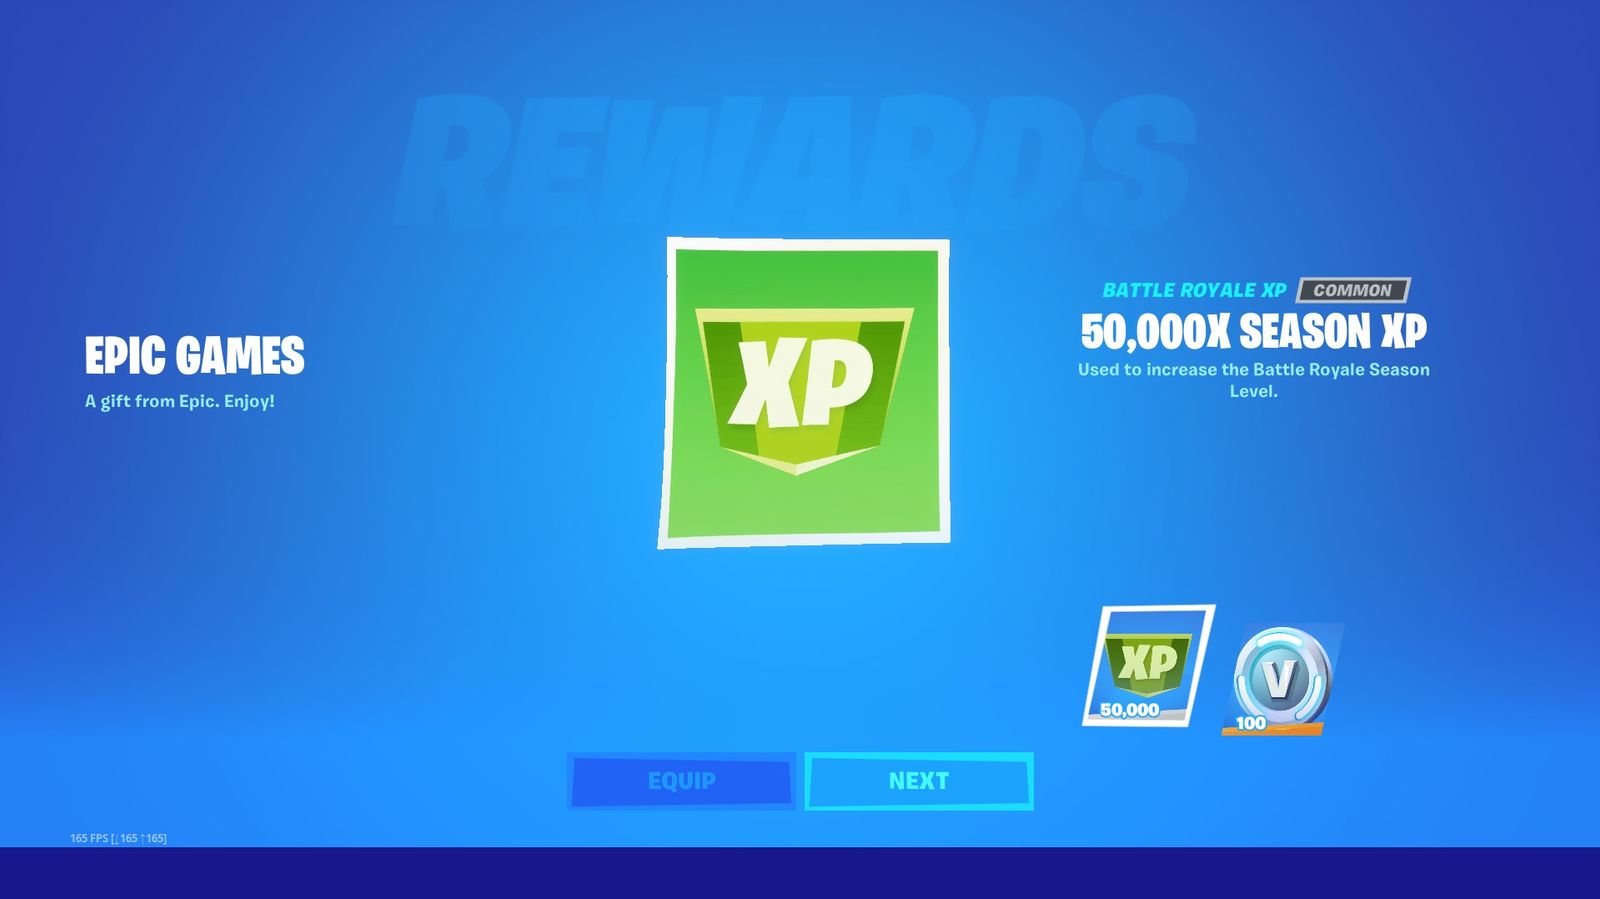 FREE: Players were given 50,000 free XP for logging in after the 15.10 update.